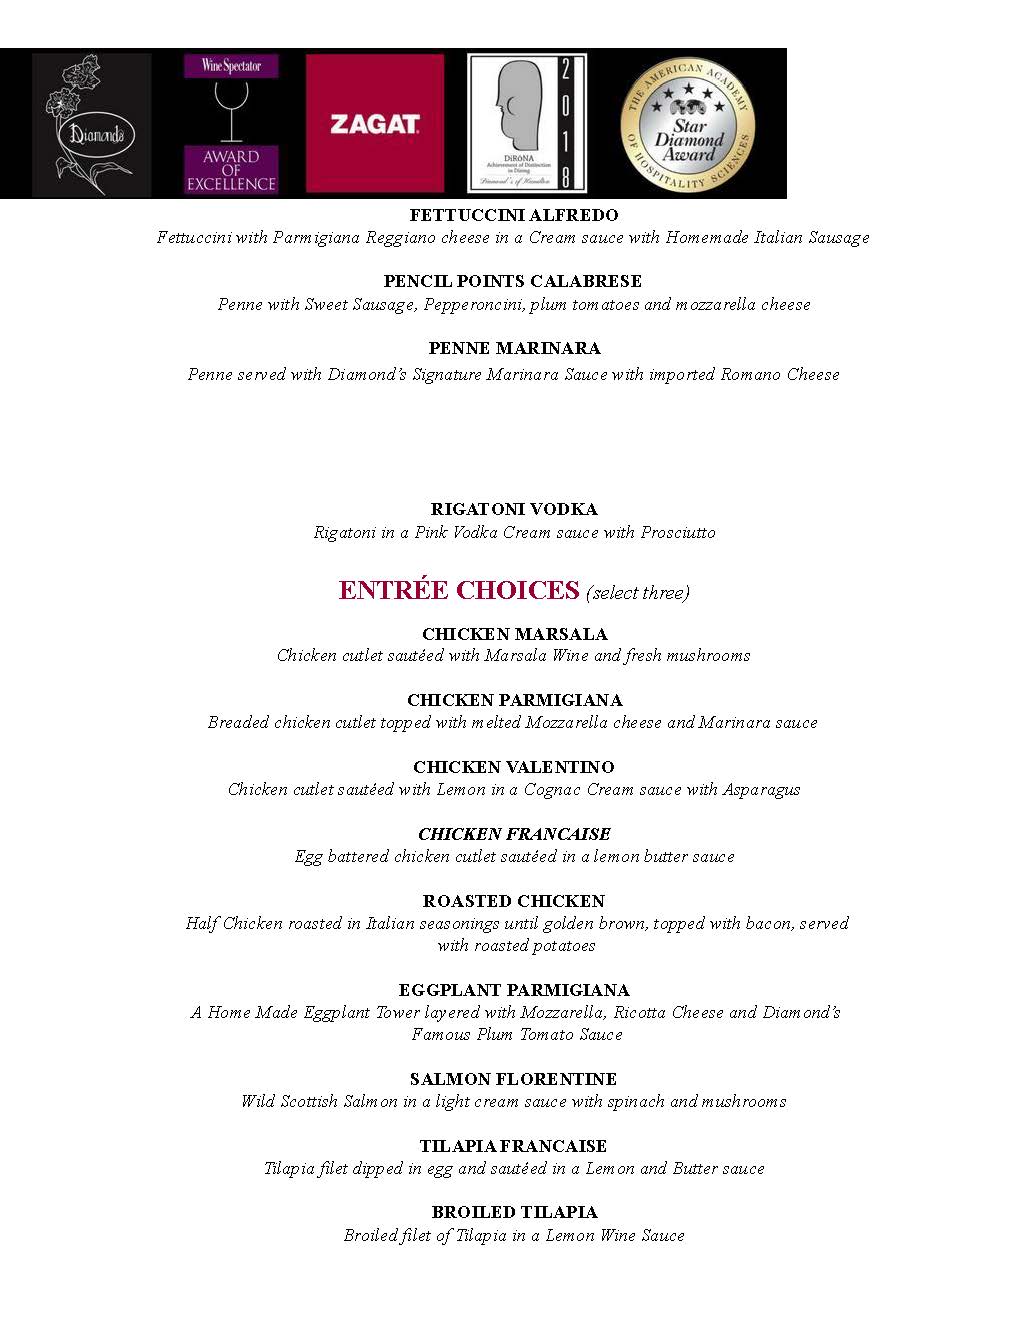 Menu page featuring italian dishes including pasta, various chicken entrées, and salmon, along with descriptions and drink pairings, styled in an elegant black and white design.